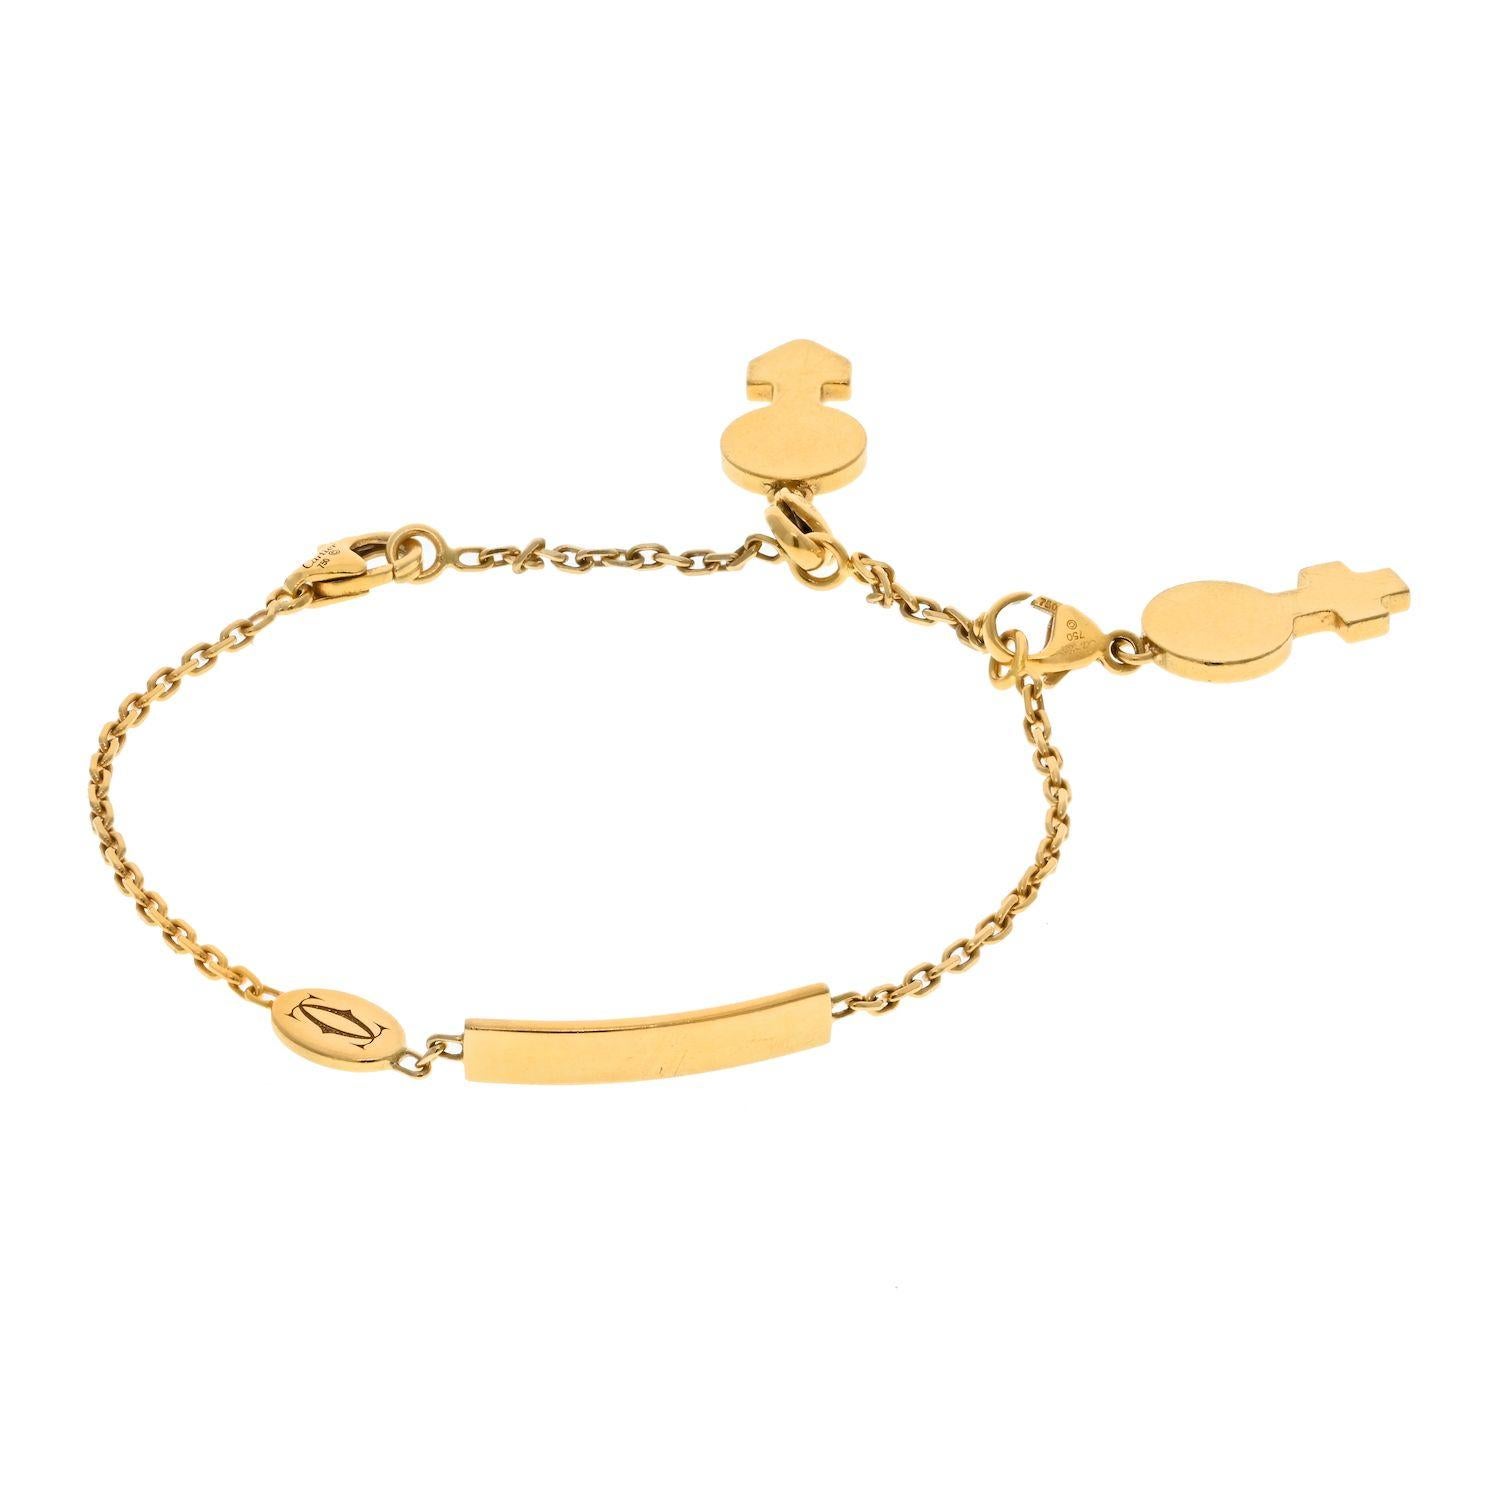 Beautiful and charming this is a vintage chain name ID plate bracelet by Cartier. Crafted in 18k yellow gold. This bracelet comes with two authentic Cartier charms (boy and girl). 
Bracelet measures: 6.5 inches (including the lock)
Plate: Length 0.7